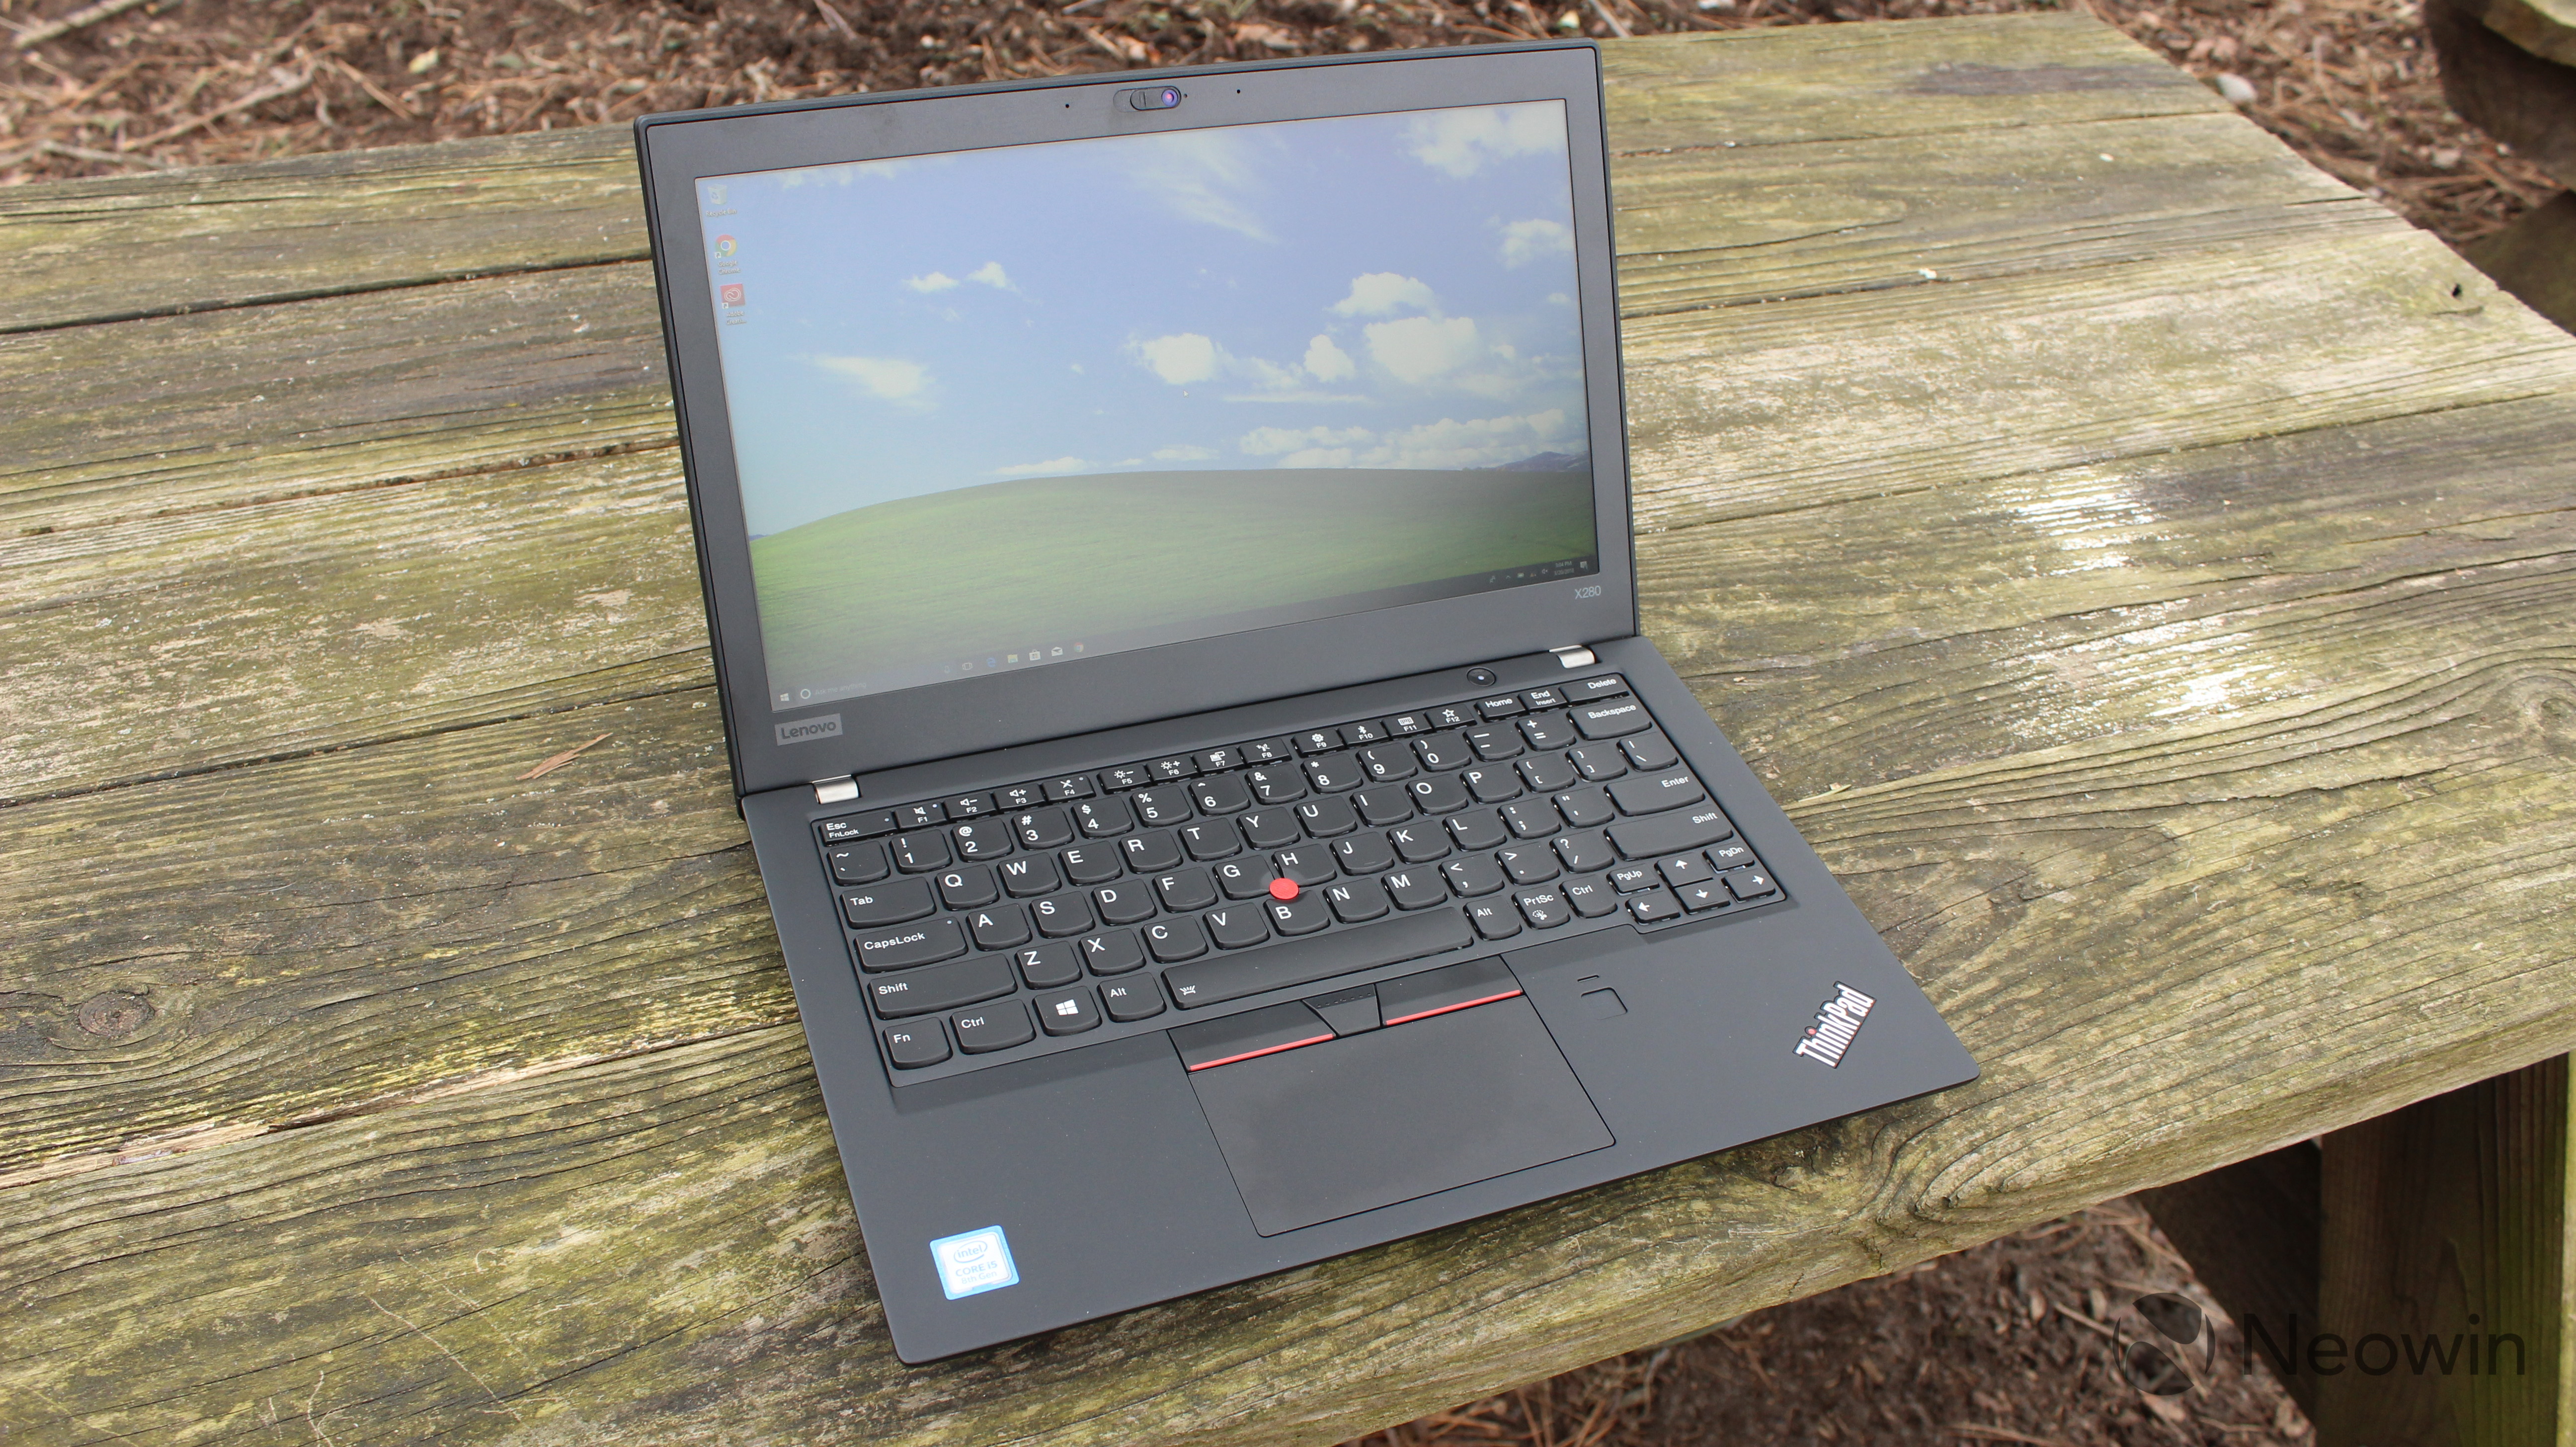 Lenovo ThinkPad X280 review: Compact, portable, and powerful - Neowin